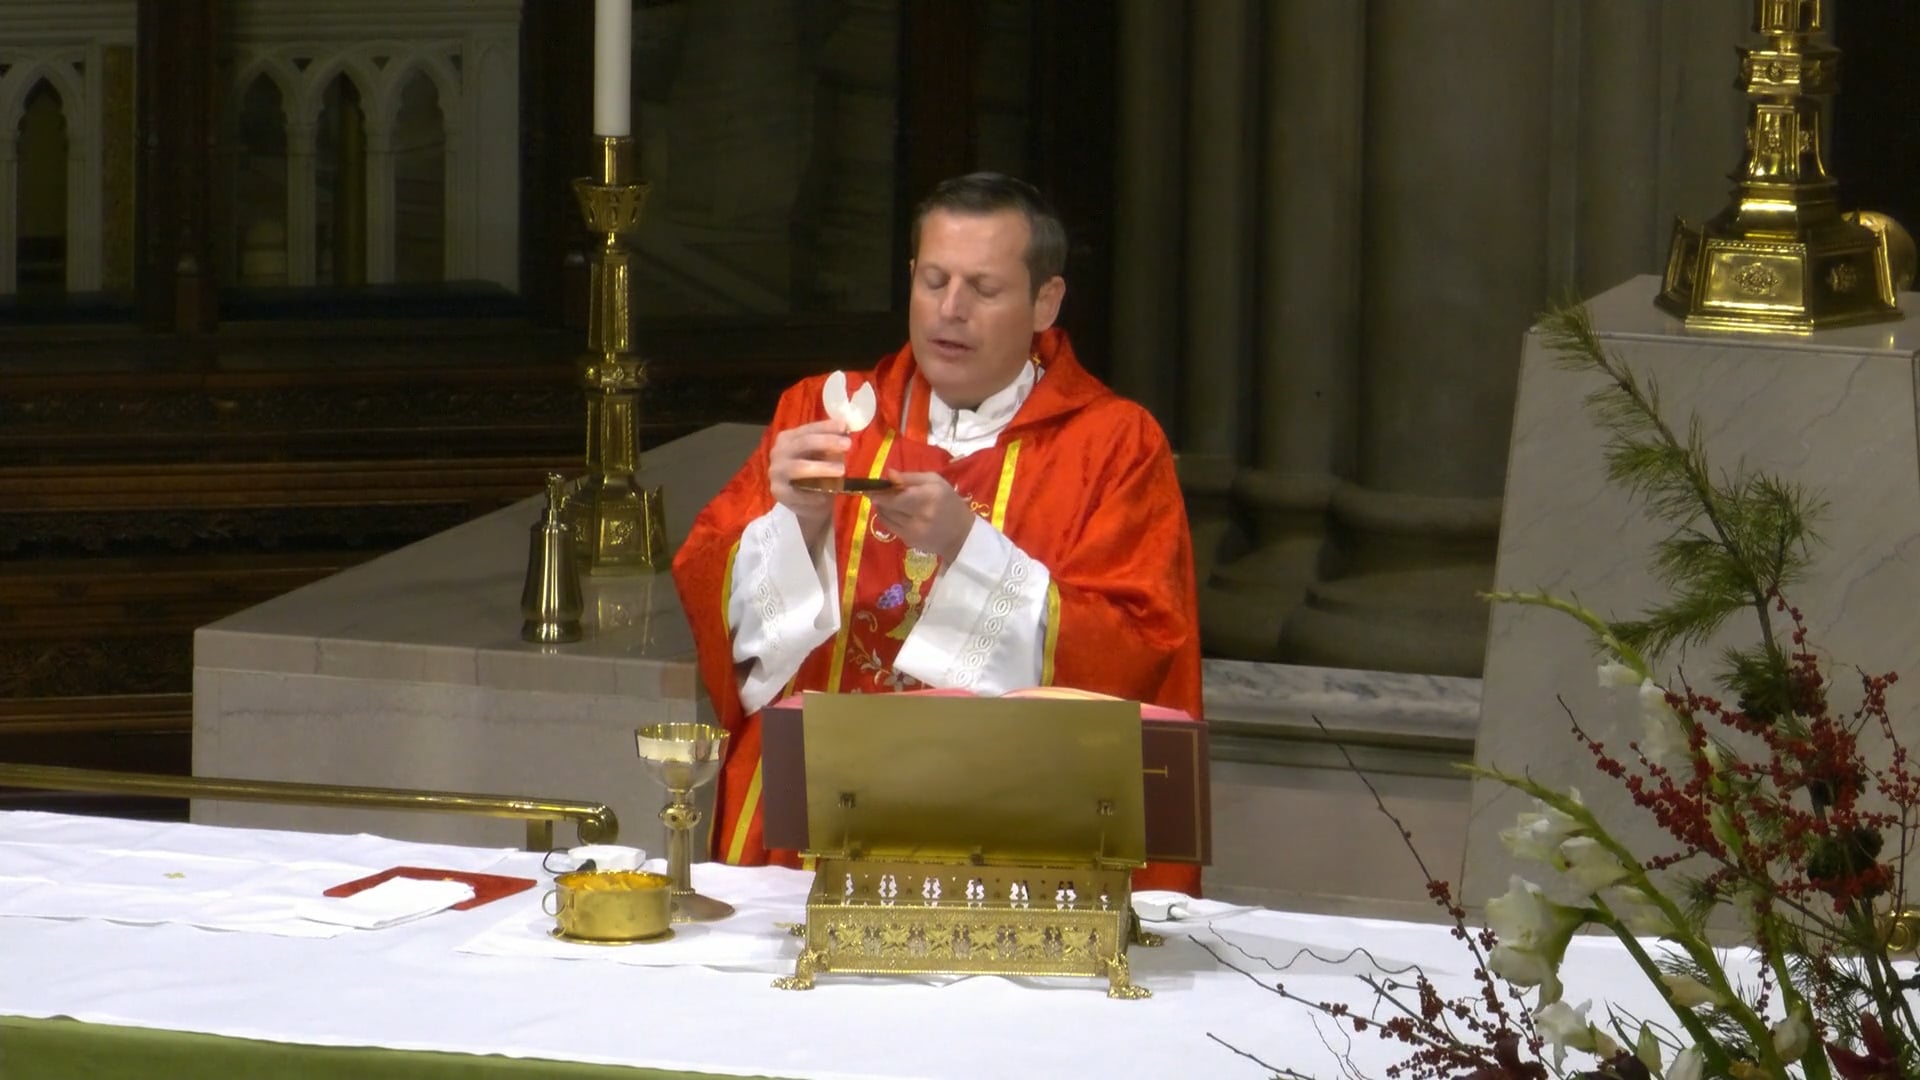 Mass from St. Patrick's Cathedral - November 23, 2022